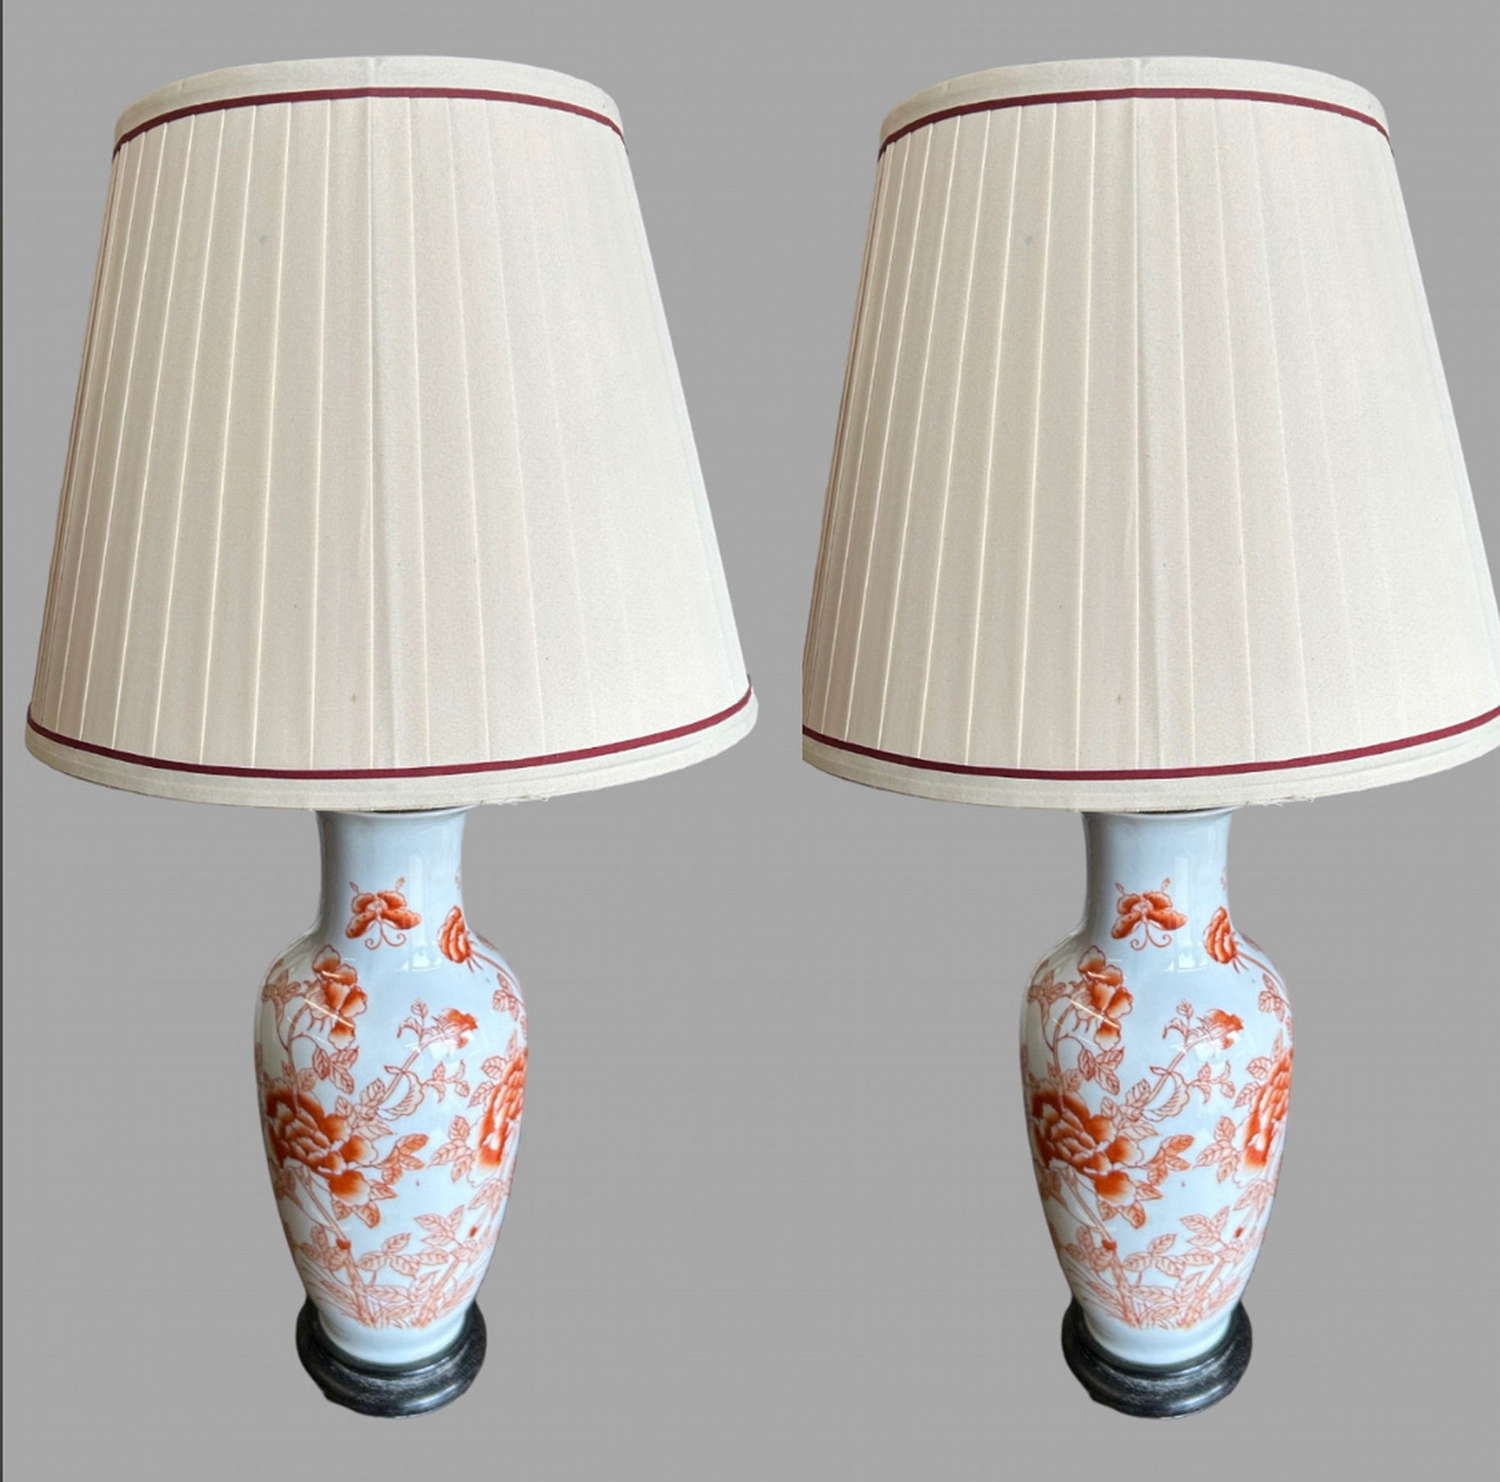 Pair of Red and White Decorative Lamps